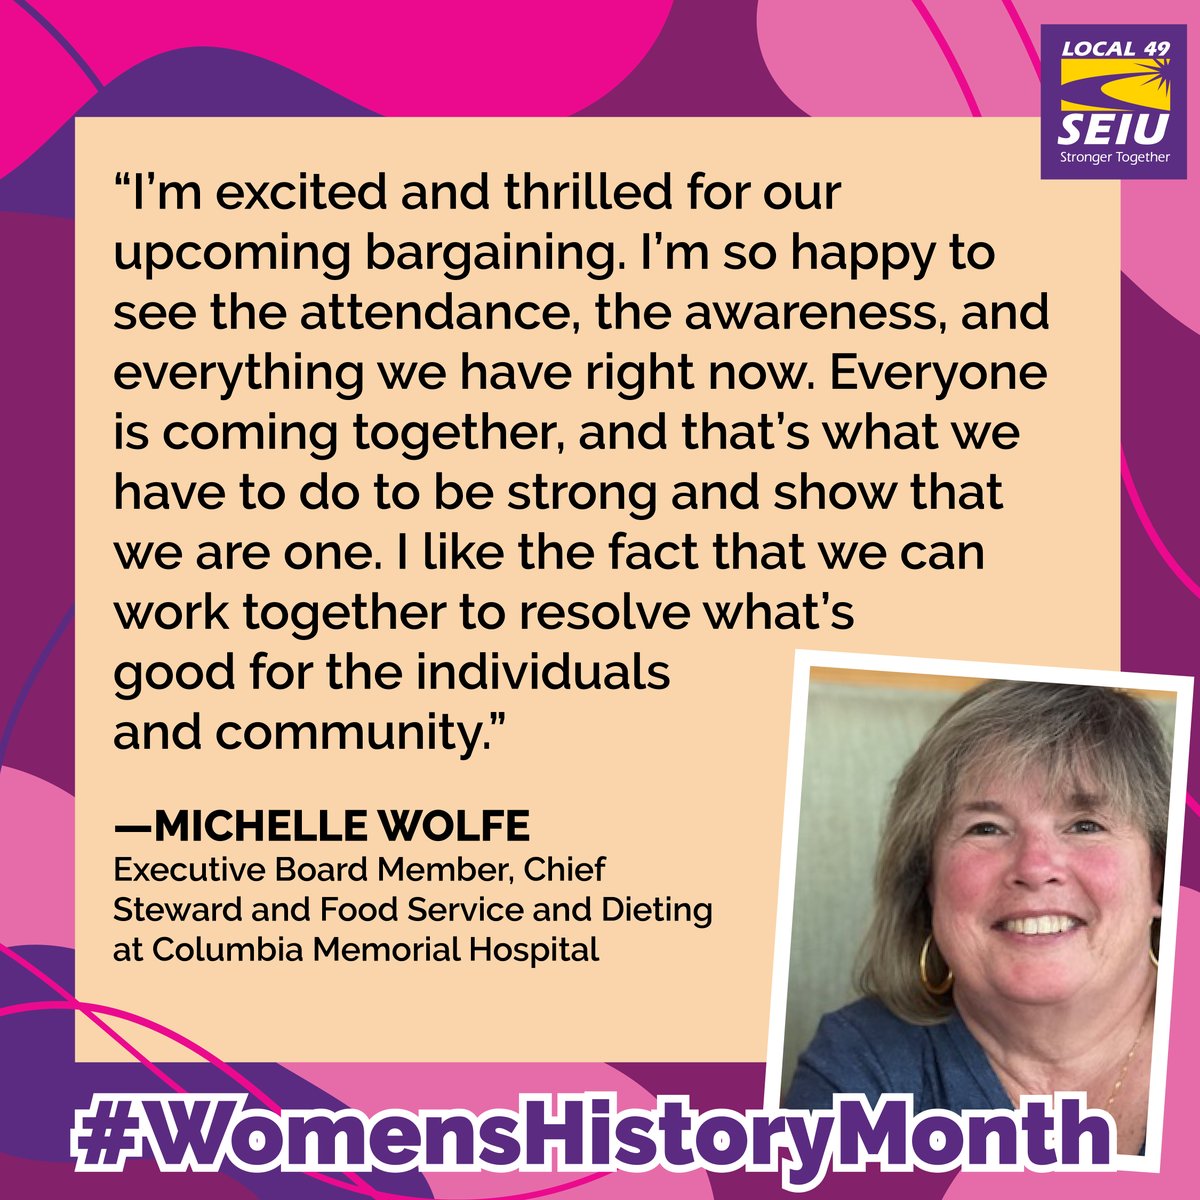 Michelle Wolfe is dedicated leader in our Union Executive Board & Chief Steward at Columbia Memorial Hospital. Michelle shows us how one person can make a big difference. Let's be inspired by her & make positive changes in our own lives & communities. #WomensHistoryMonth